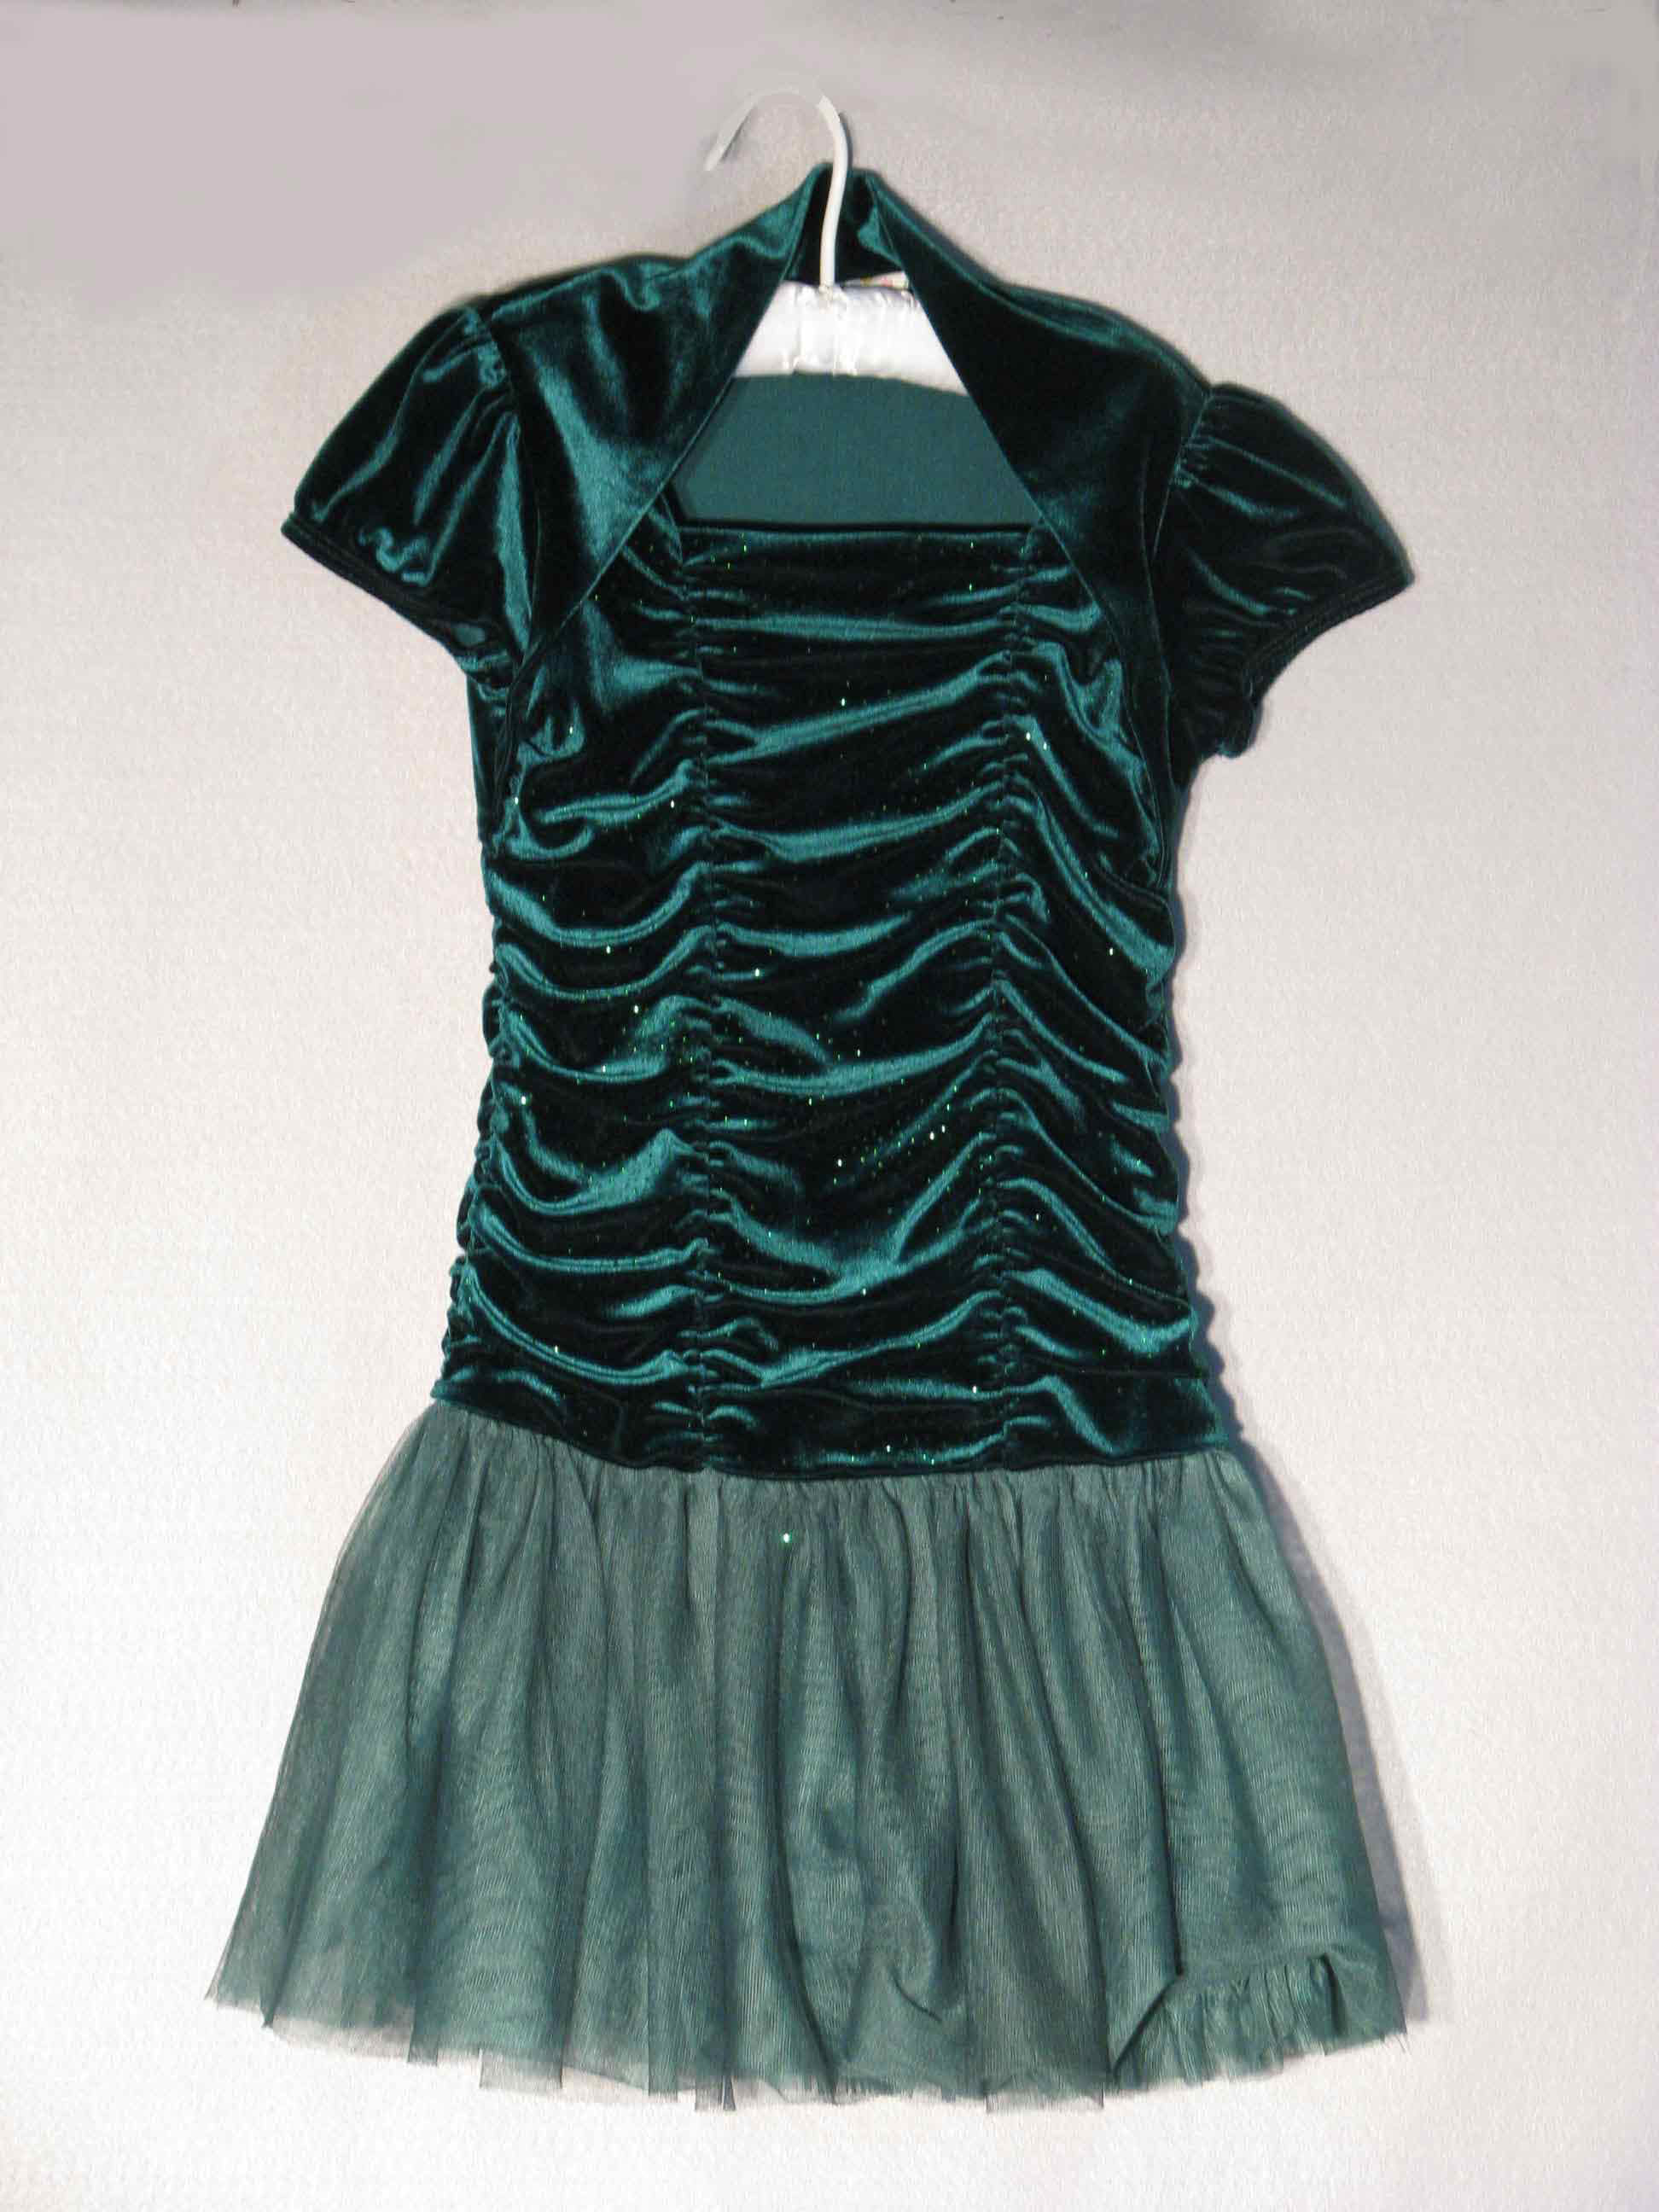 green special occasion girl's dress.WFG319-18